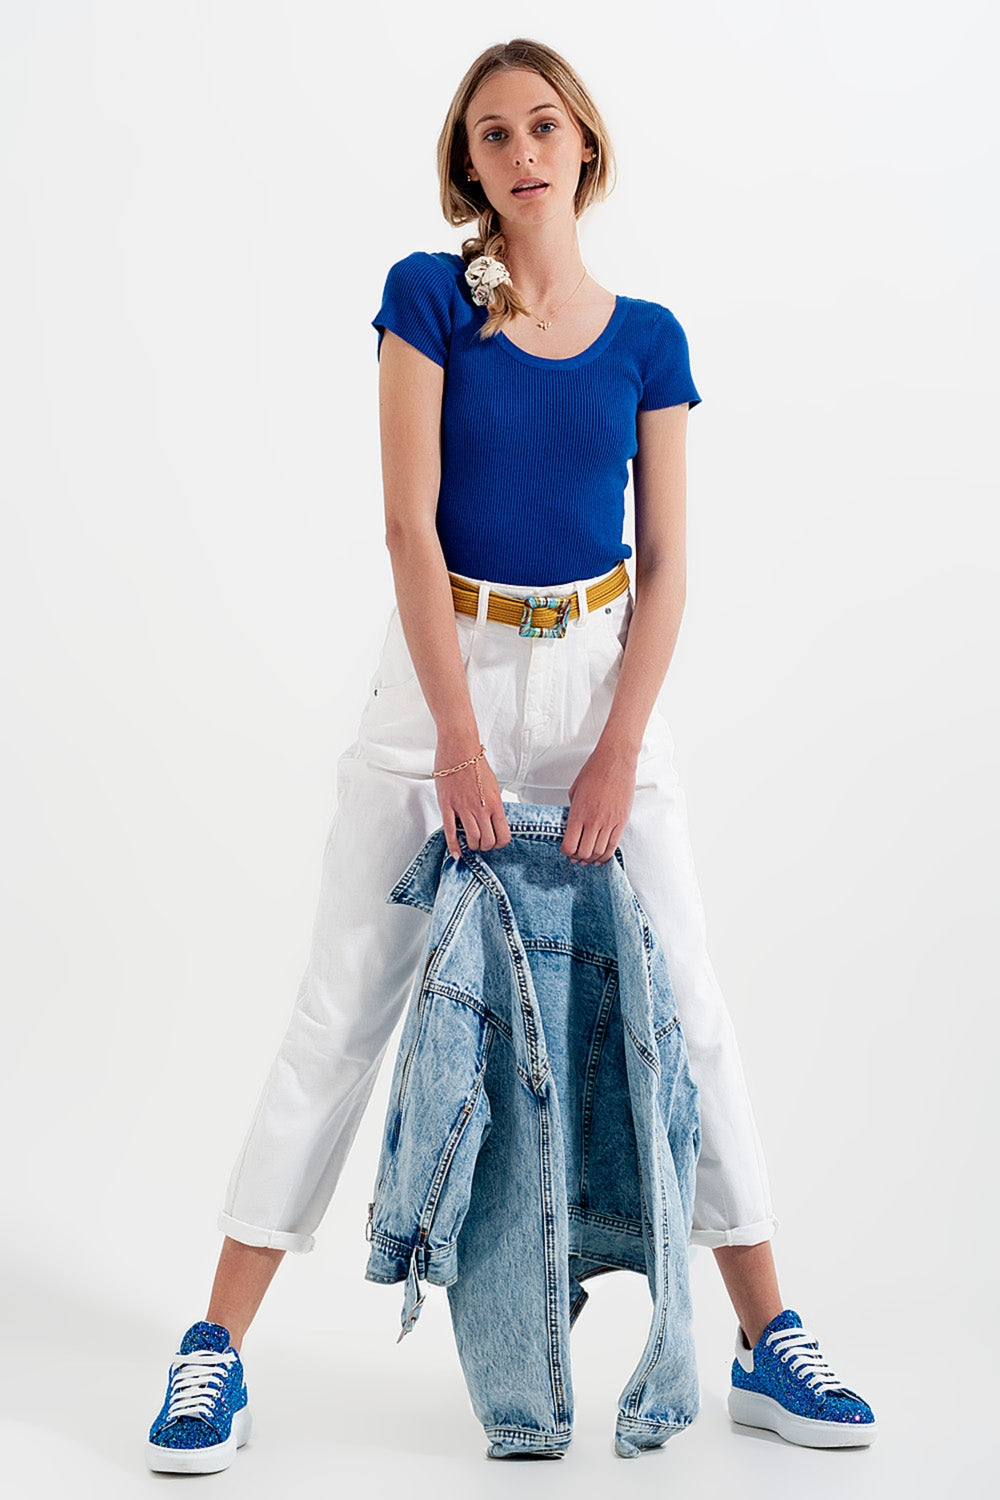 High rise mom jeans with pleat front in white Szua Store